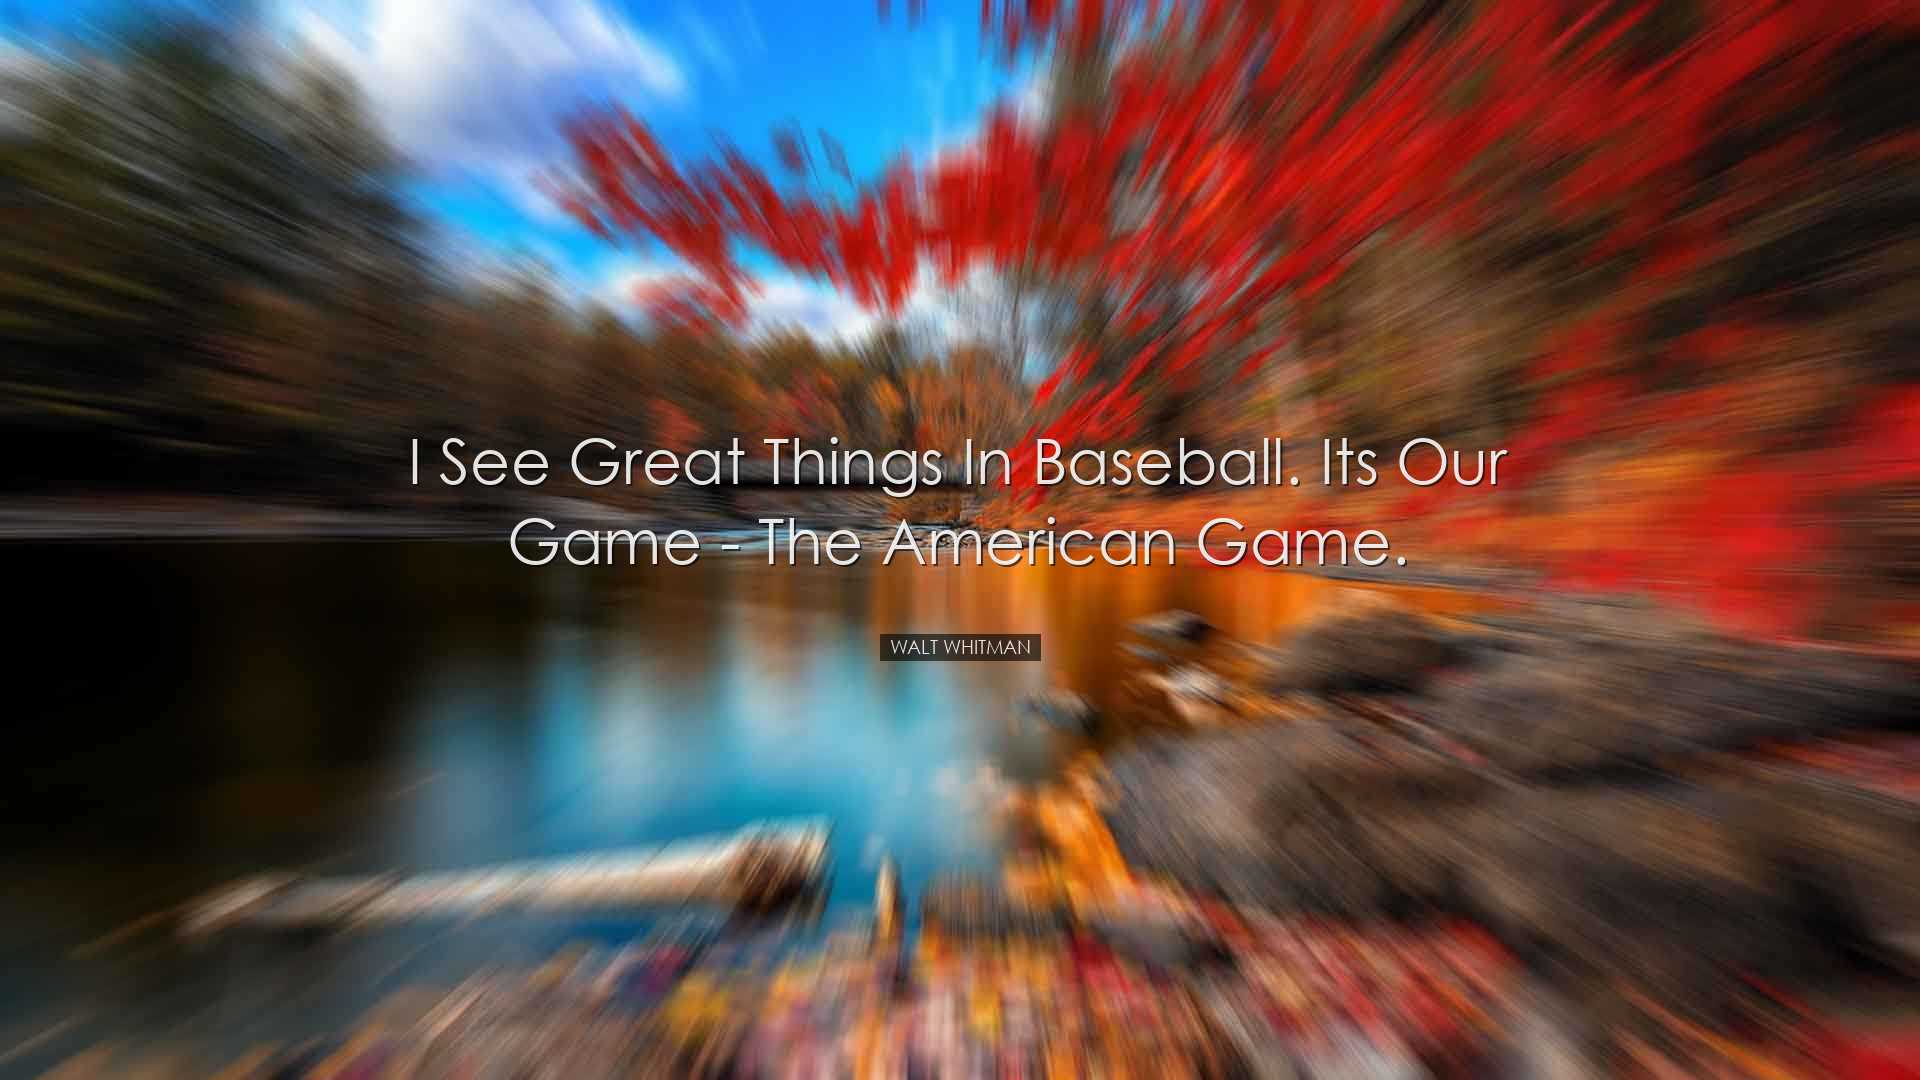 I see great things in baseball. Its our game - the American game.